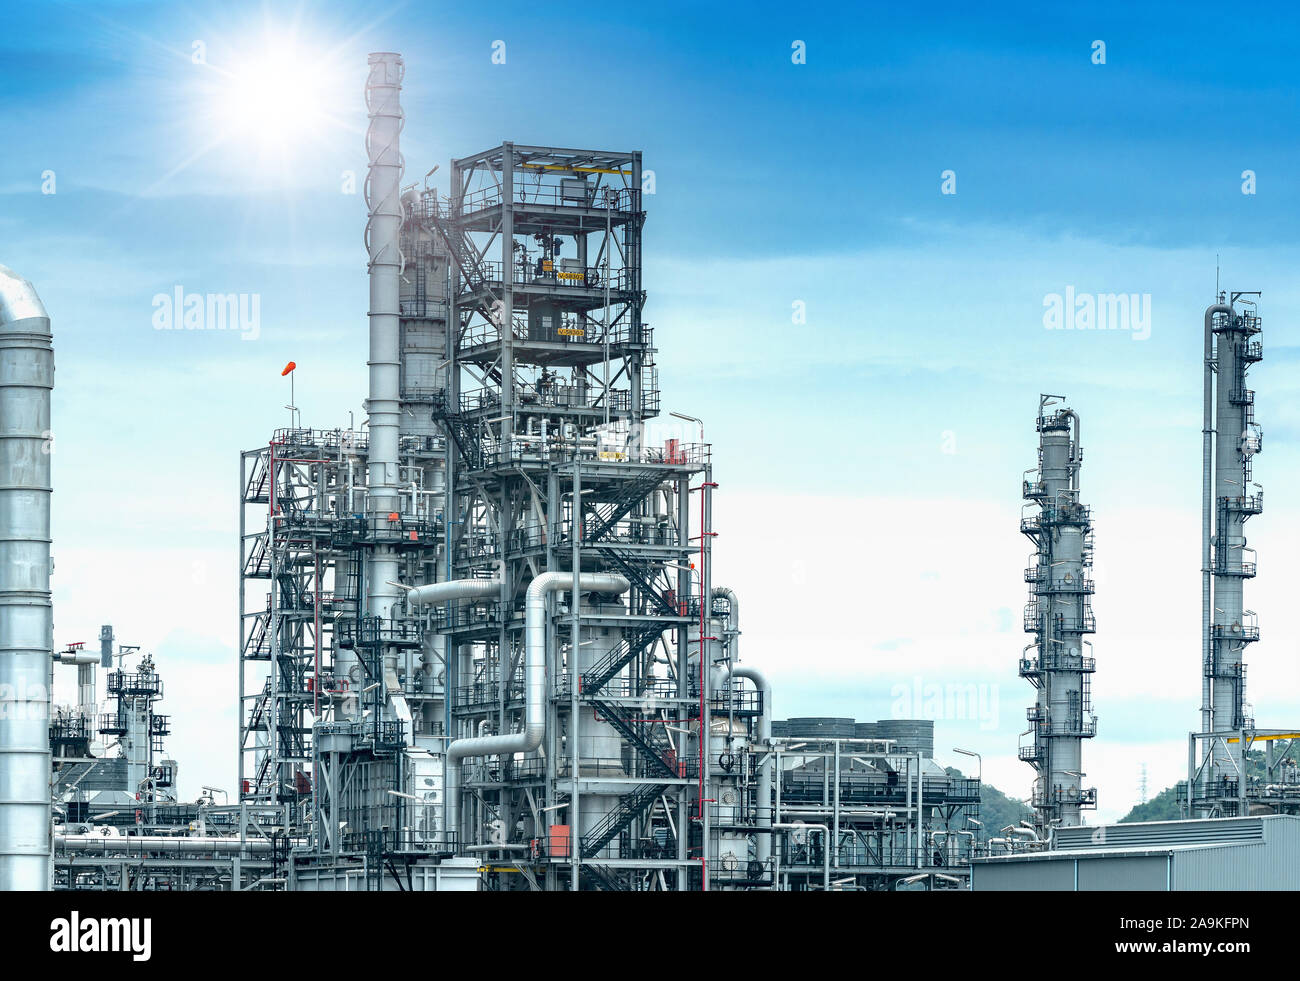 Oil and gas refinery plant form industry petroleum zone,Refinery equipment pipeline steel and oil storage tank at sunrise. -image Stock Photo